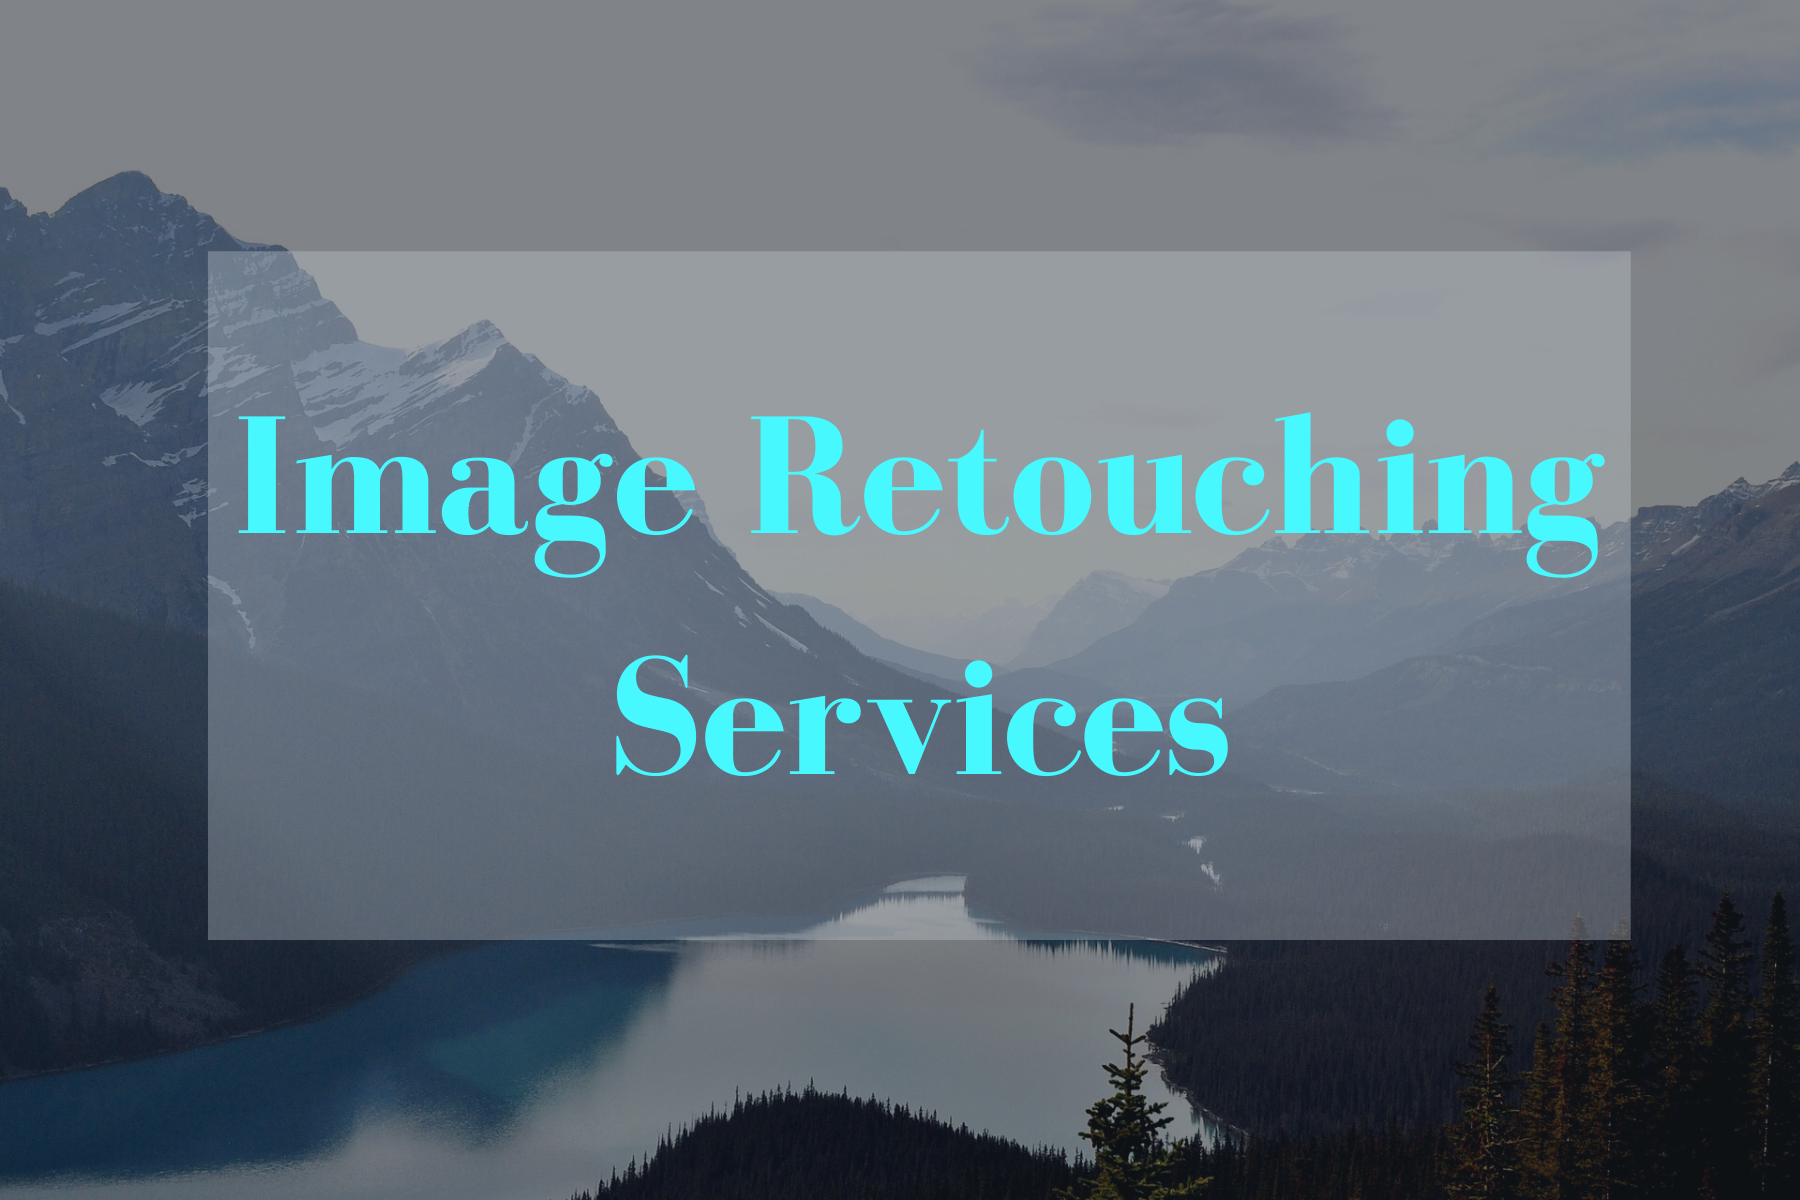 IMAGE RETOUCHING SERVICES